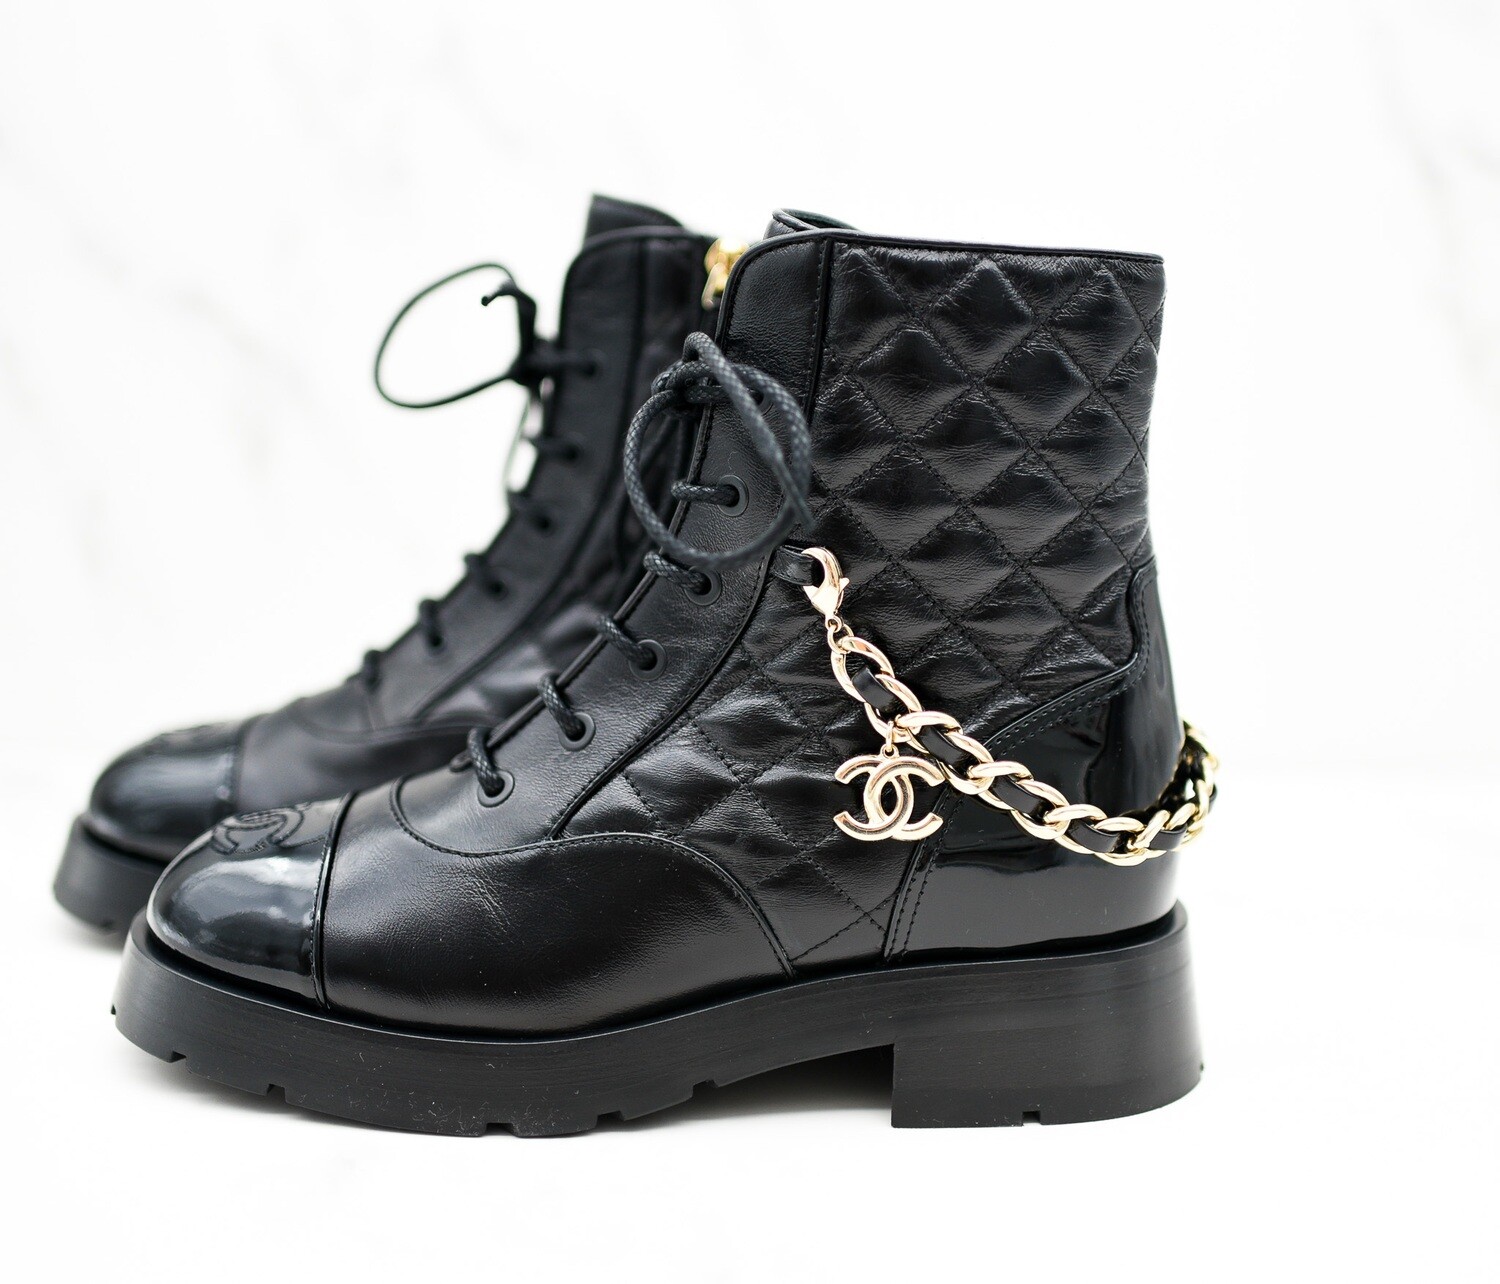 Chanel Quilted Combat Boots, Glazed Calfskin, Size 37, New in Box GA001